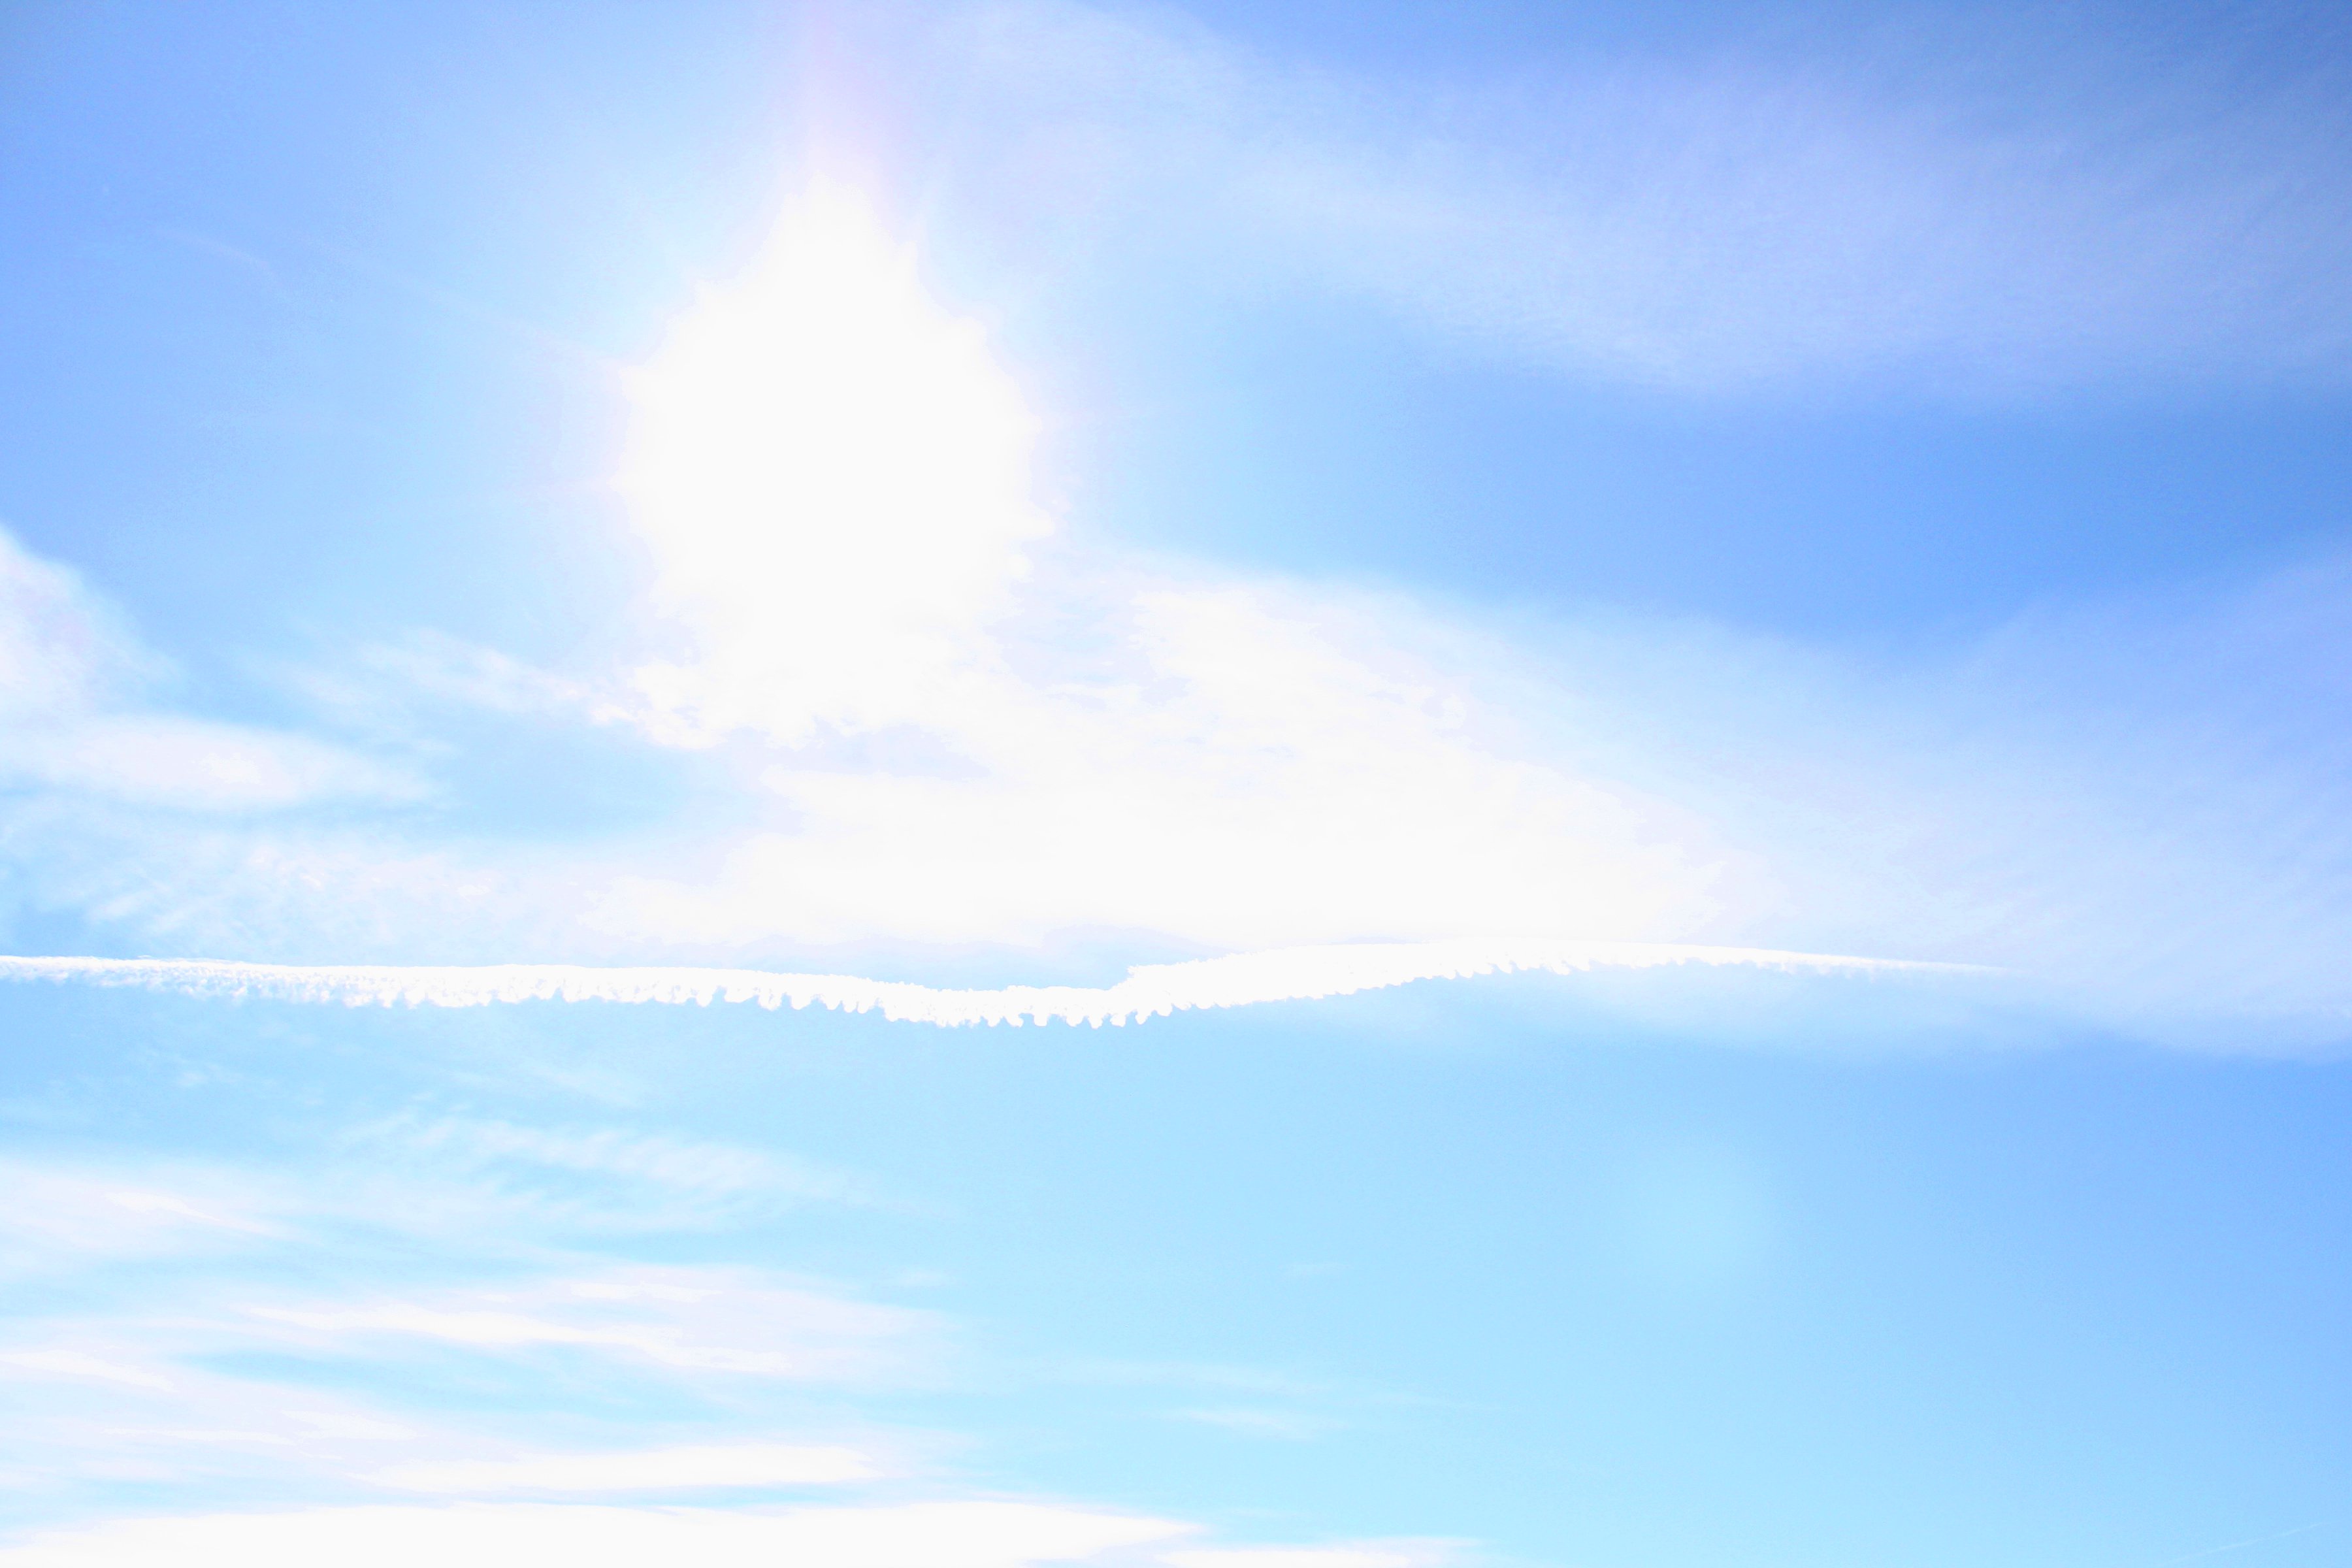 Blue Sky with Sun Clouds and Airplane Trail Picture | Free ...